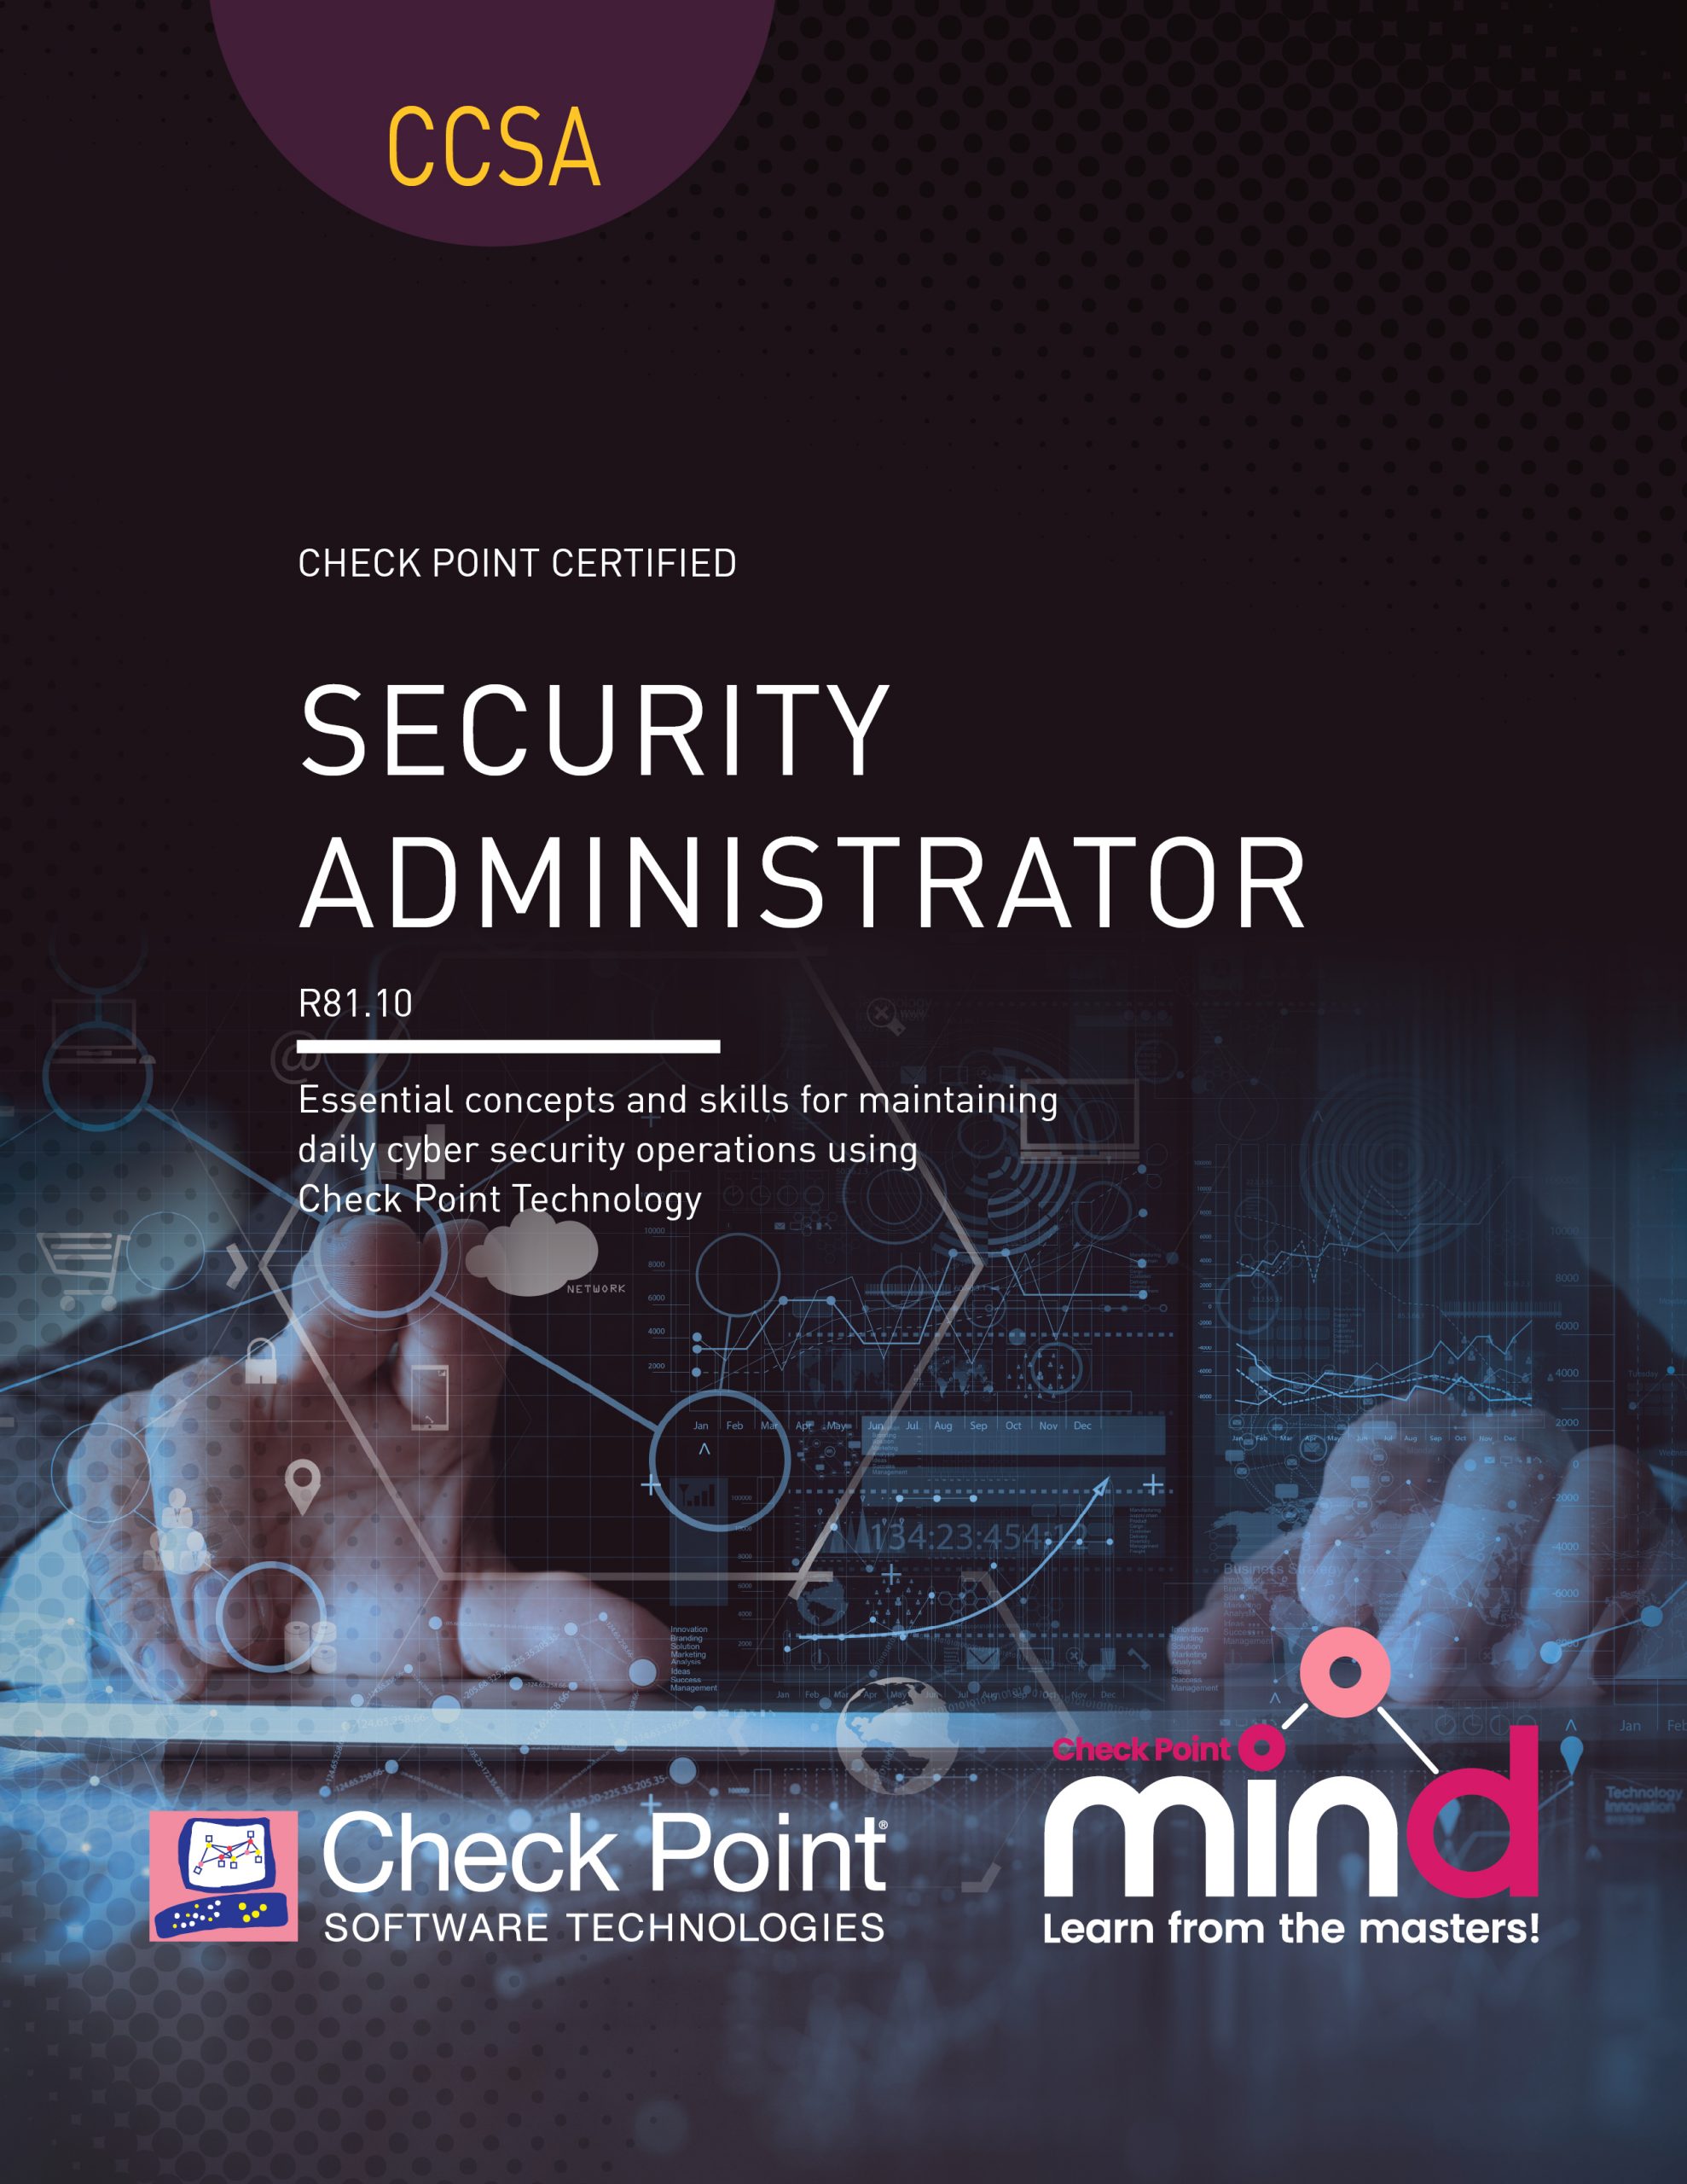 CCSA – Check Point Certified Security Administrator (CCSA v. R81.10)